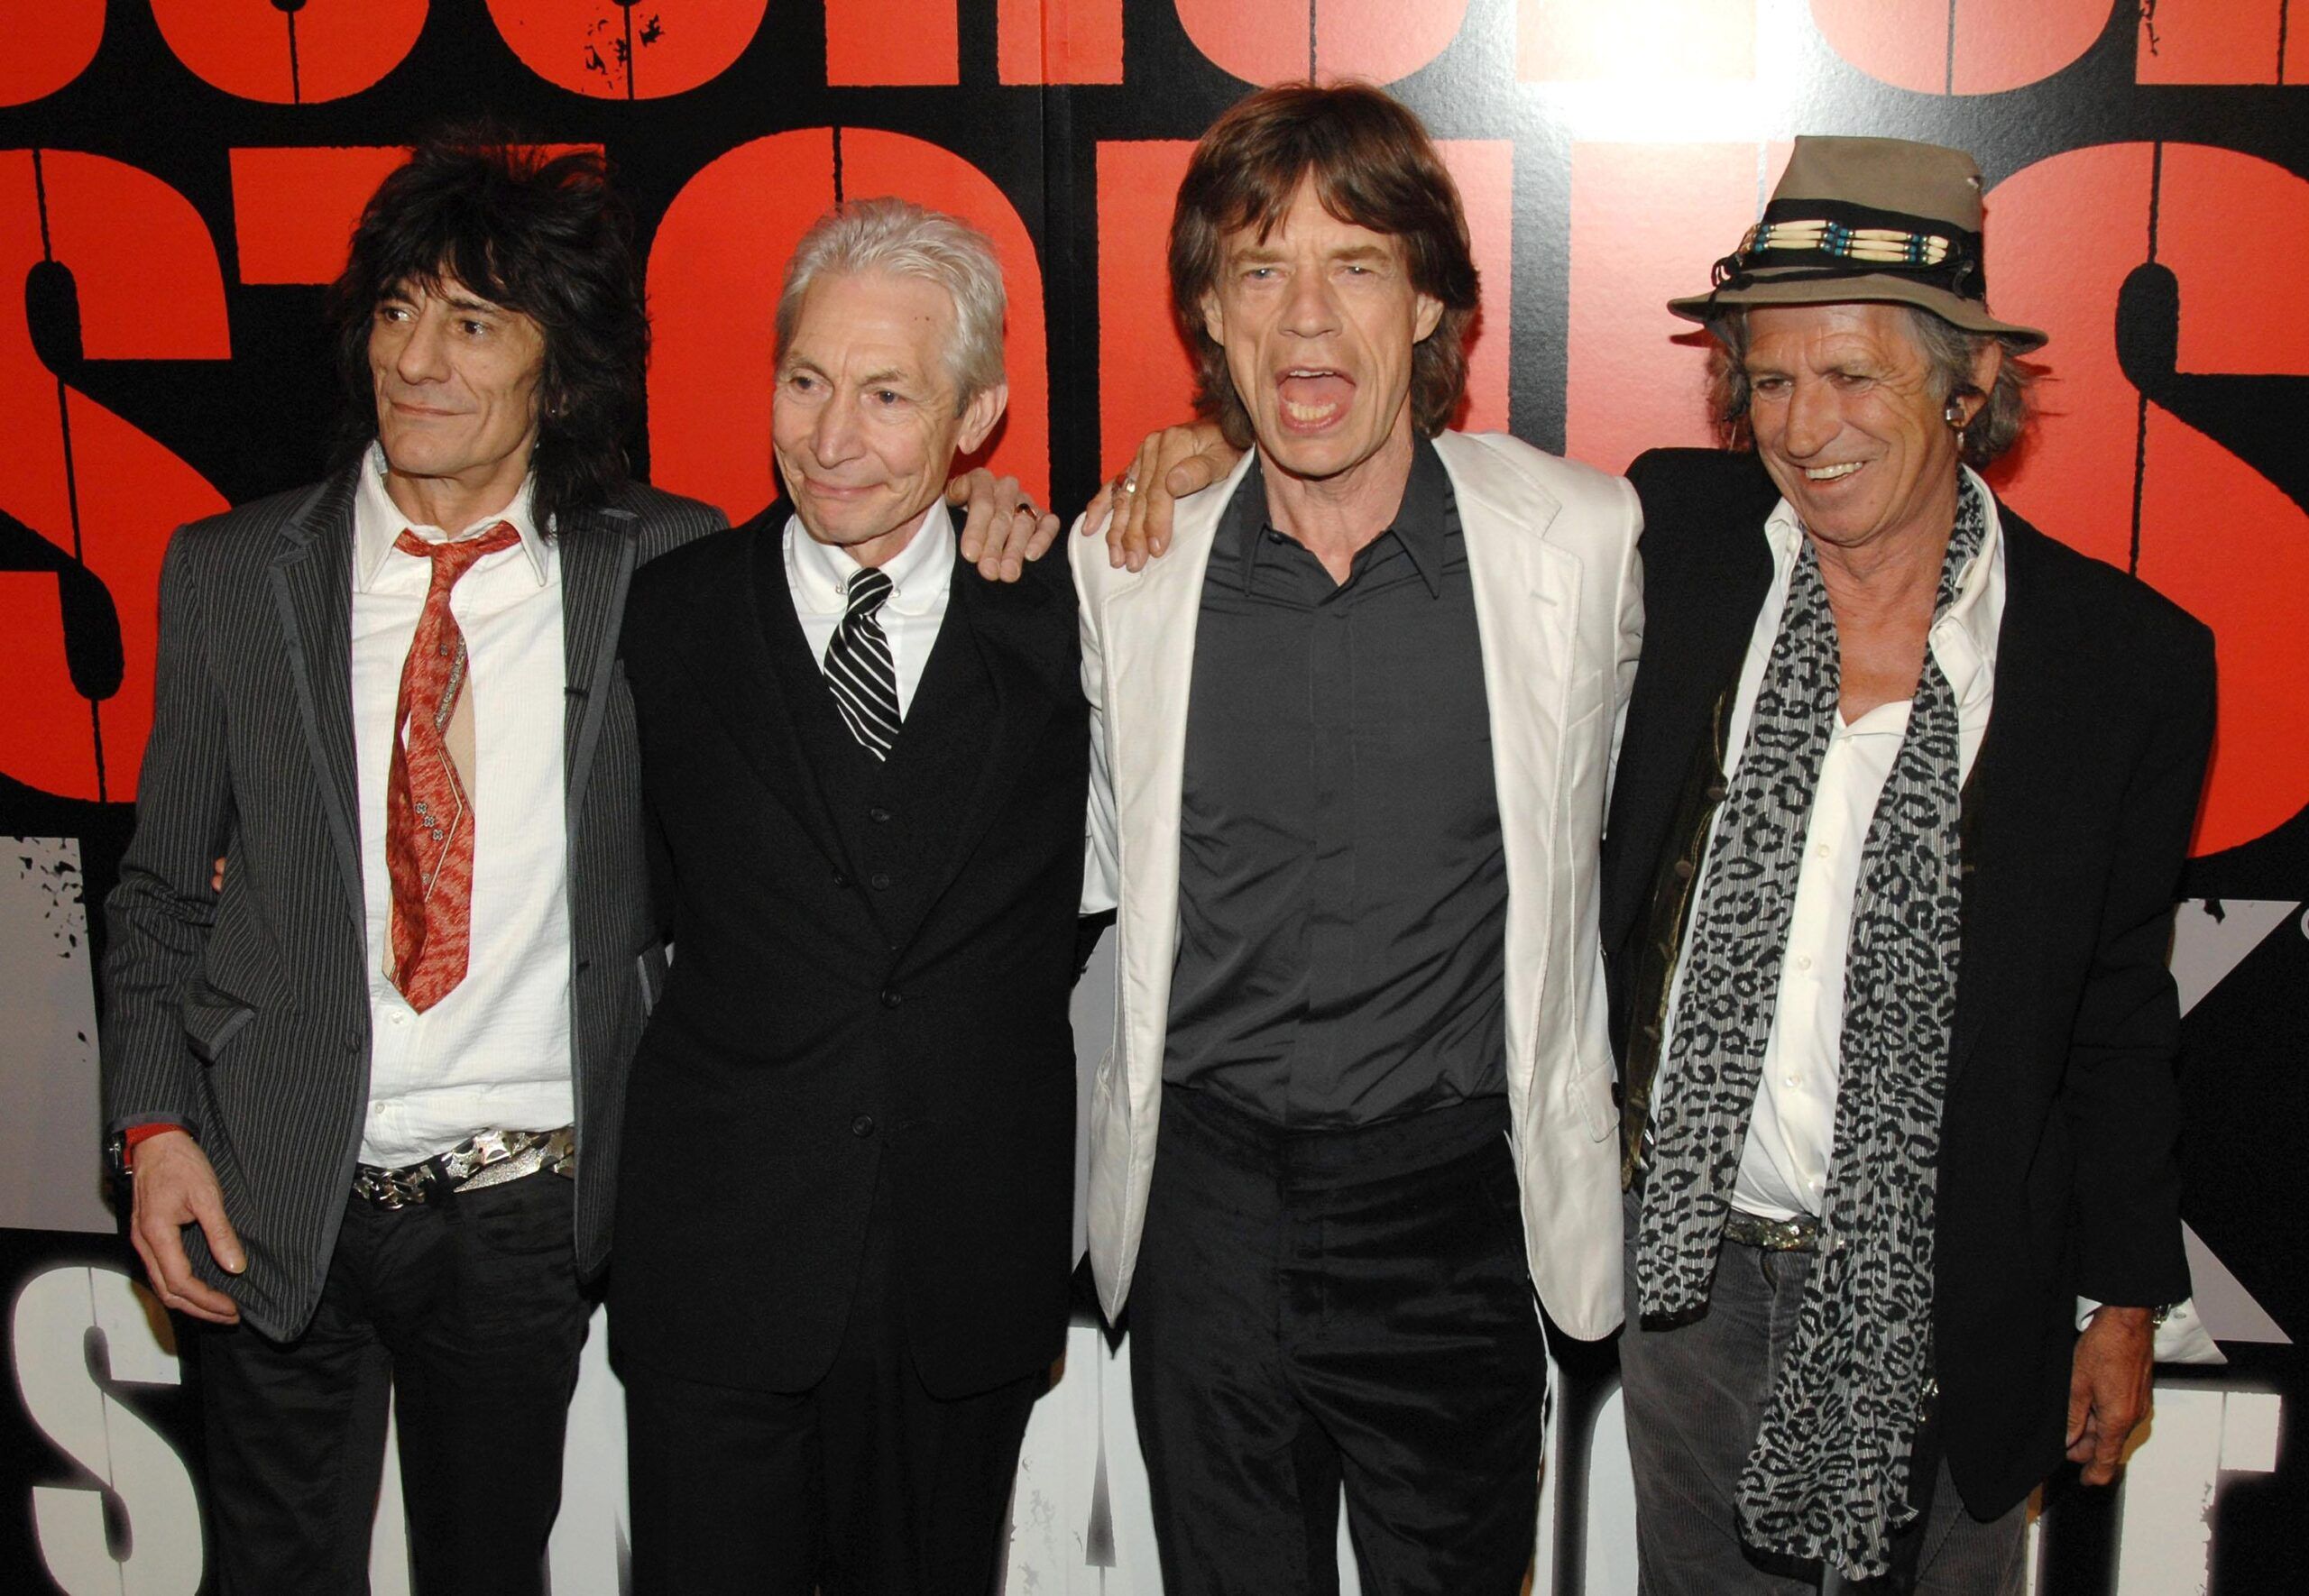 Ronnie,Wood,,Charlie,Watts,,Mick,Jagger,,Keith,Richards,At,Shinemick-jagger-bisexual-rolling-stones-affairs-sex-with-bandmates